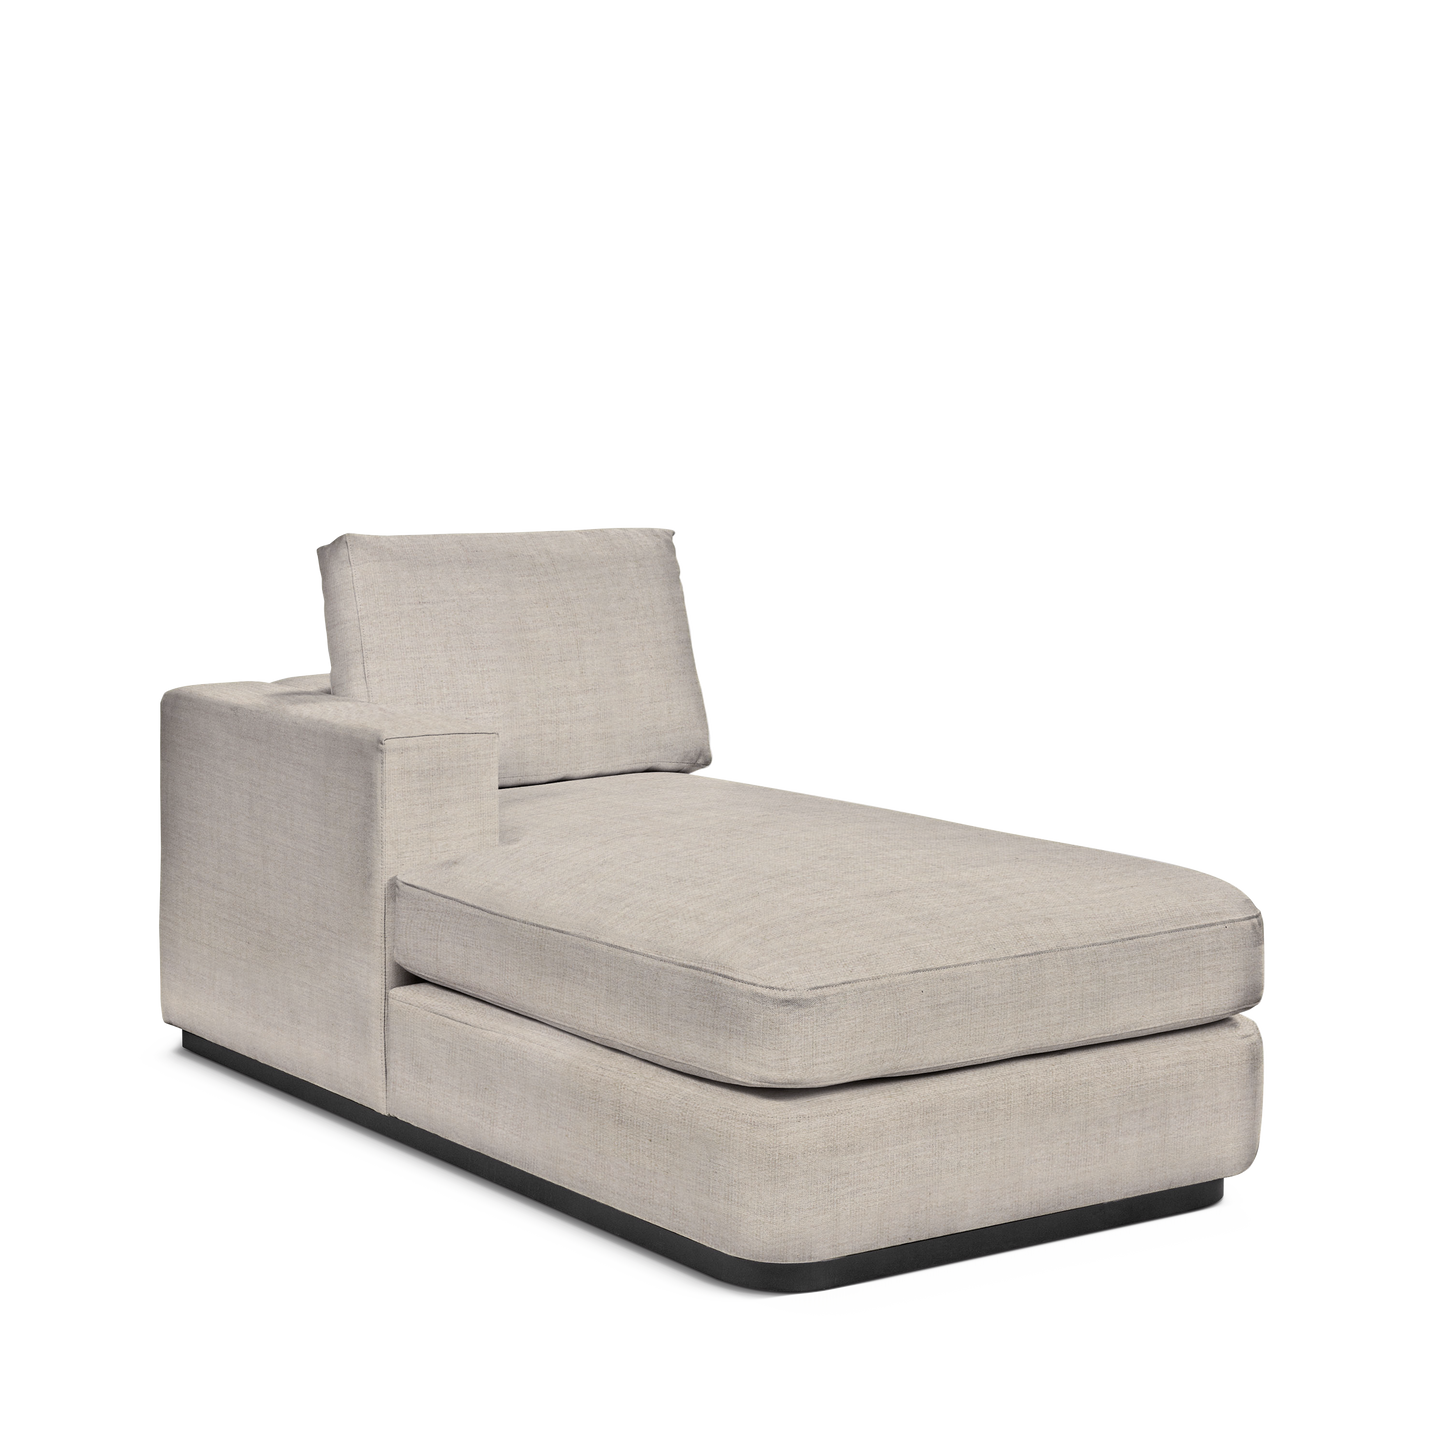 ATLAS 90 Lounge Bed arm rest left with taupe textile